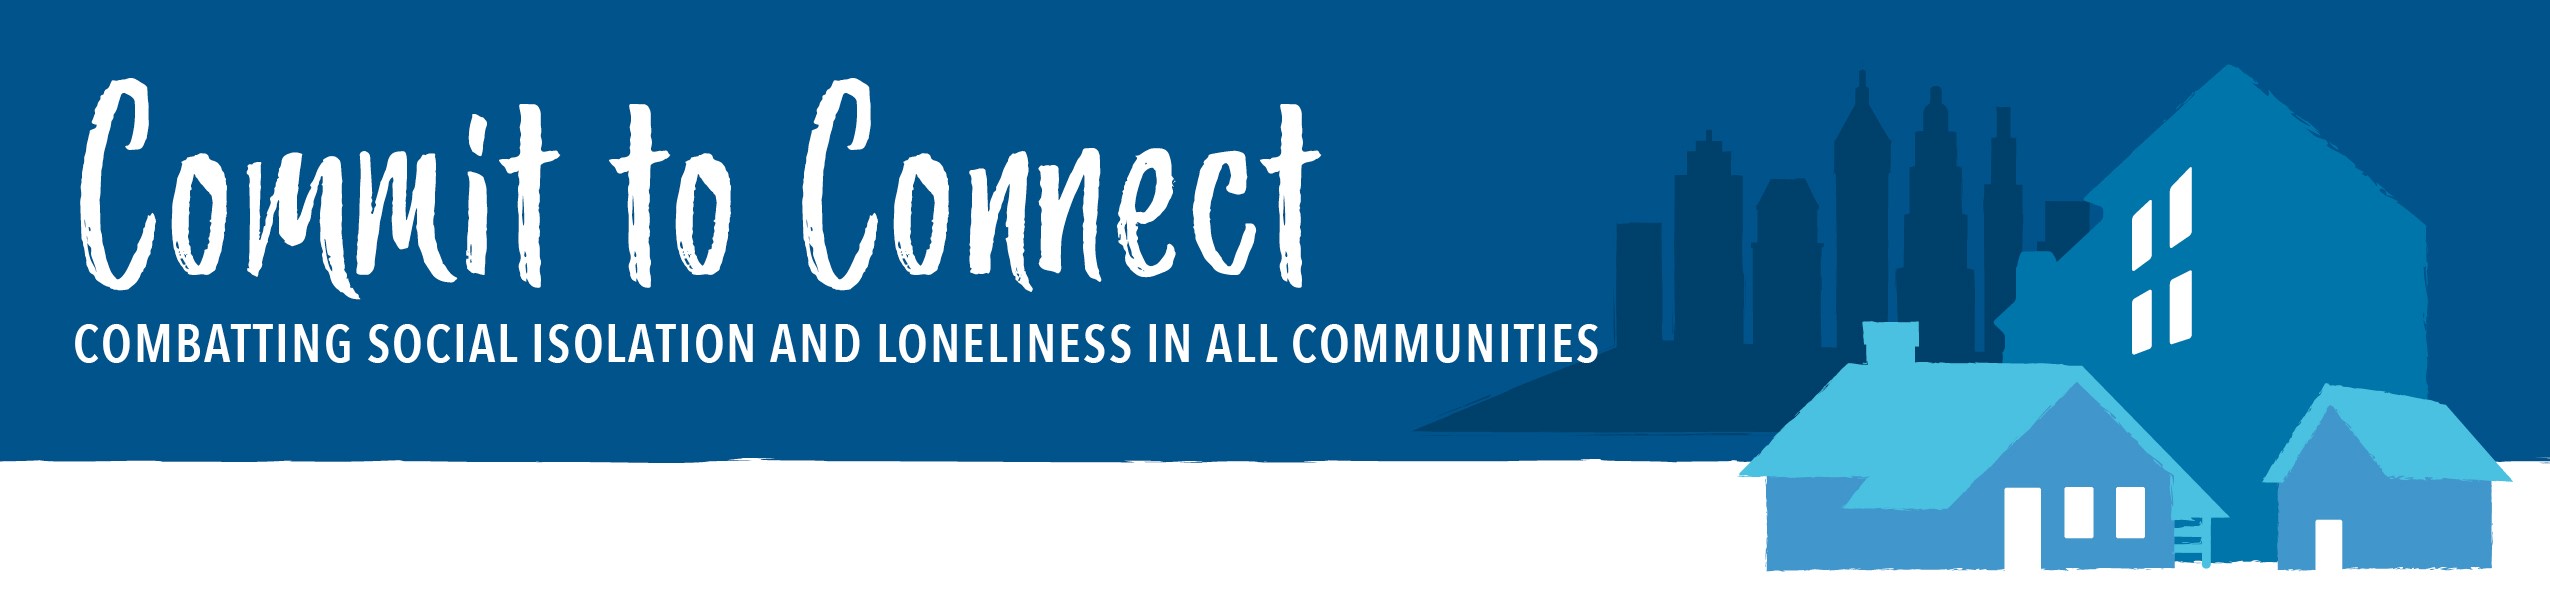 Commit to Connect combatting social isolation and loneliness in all communities